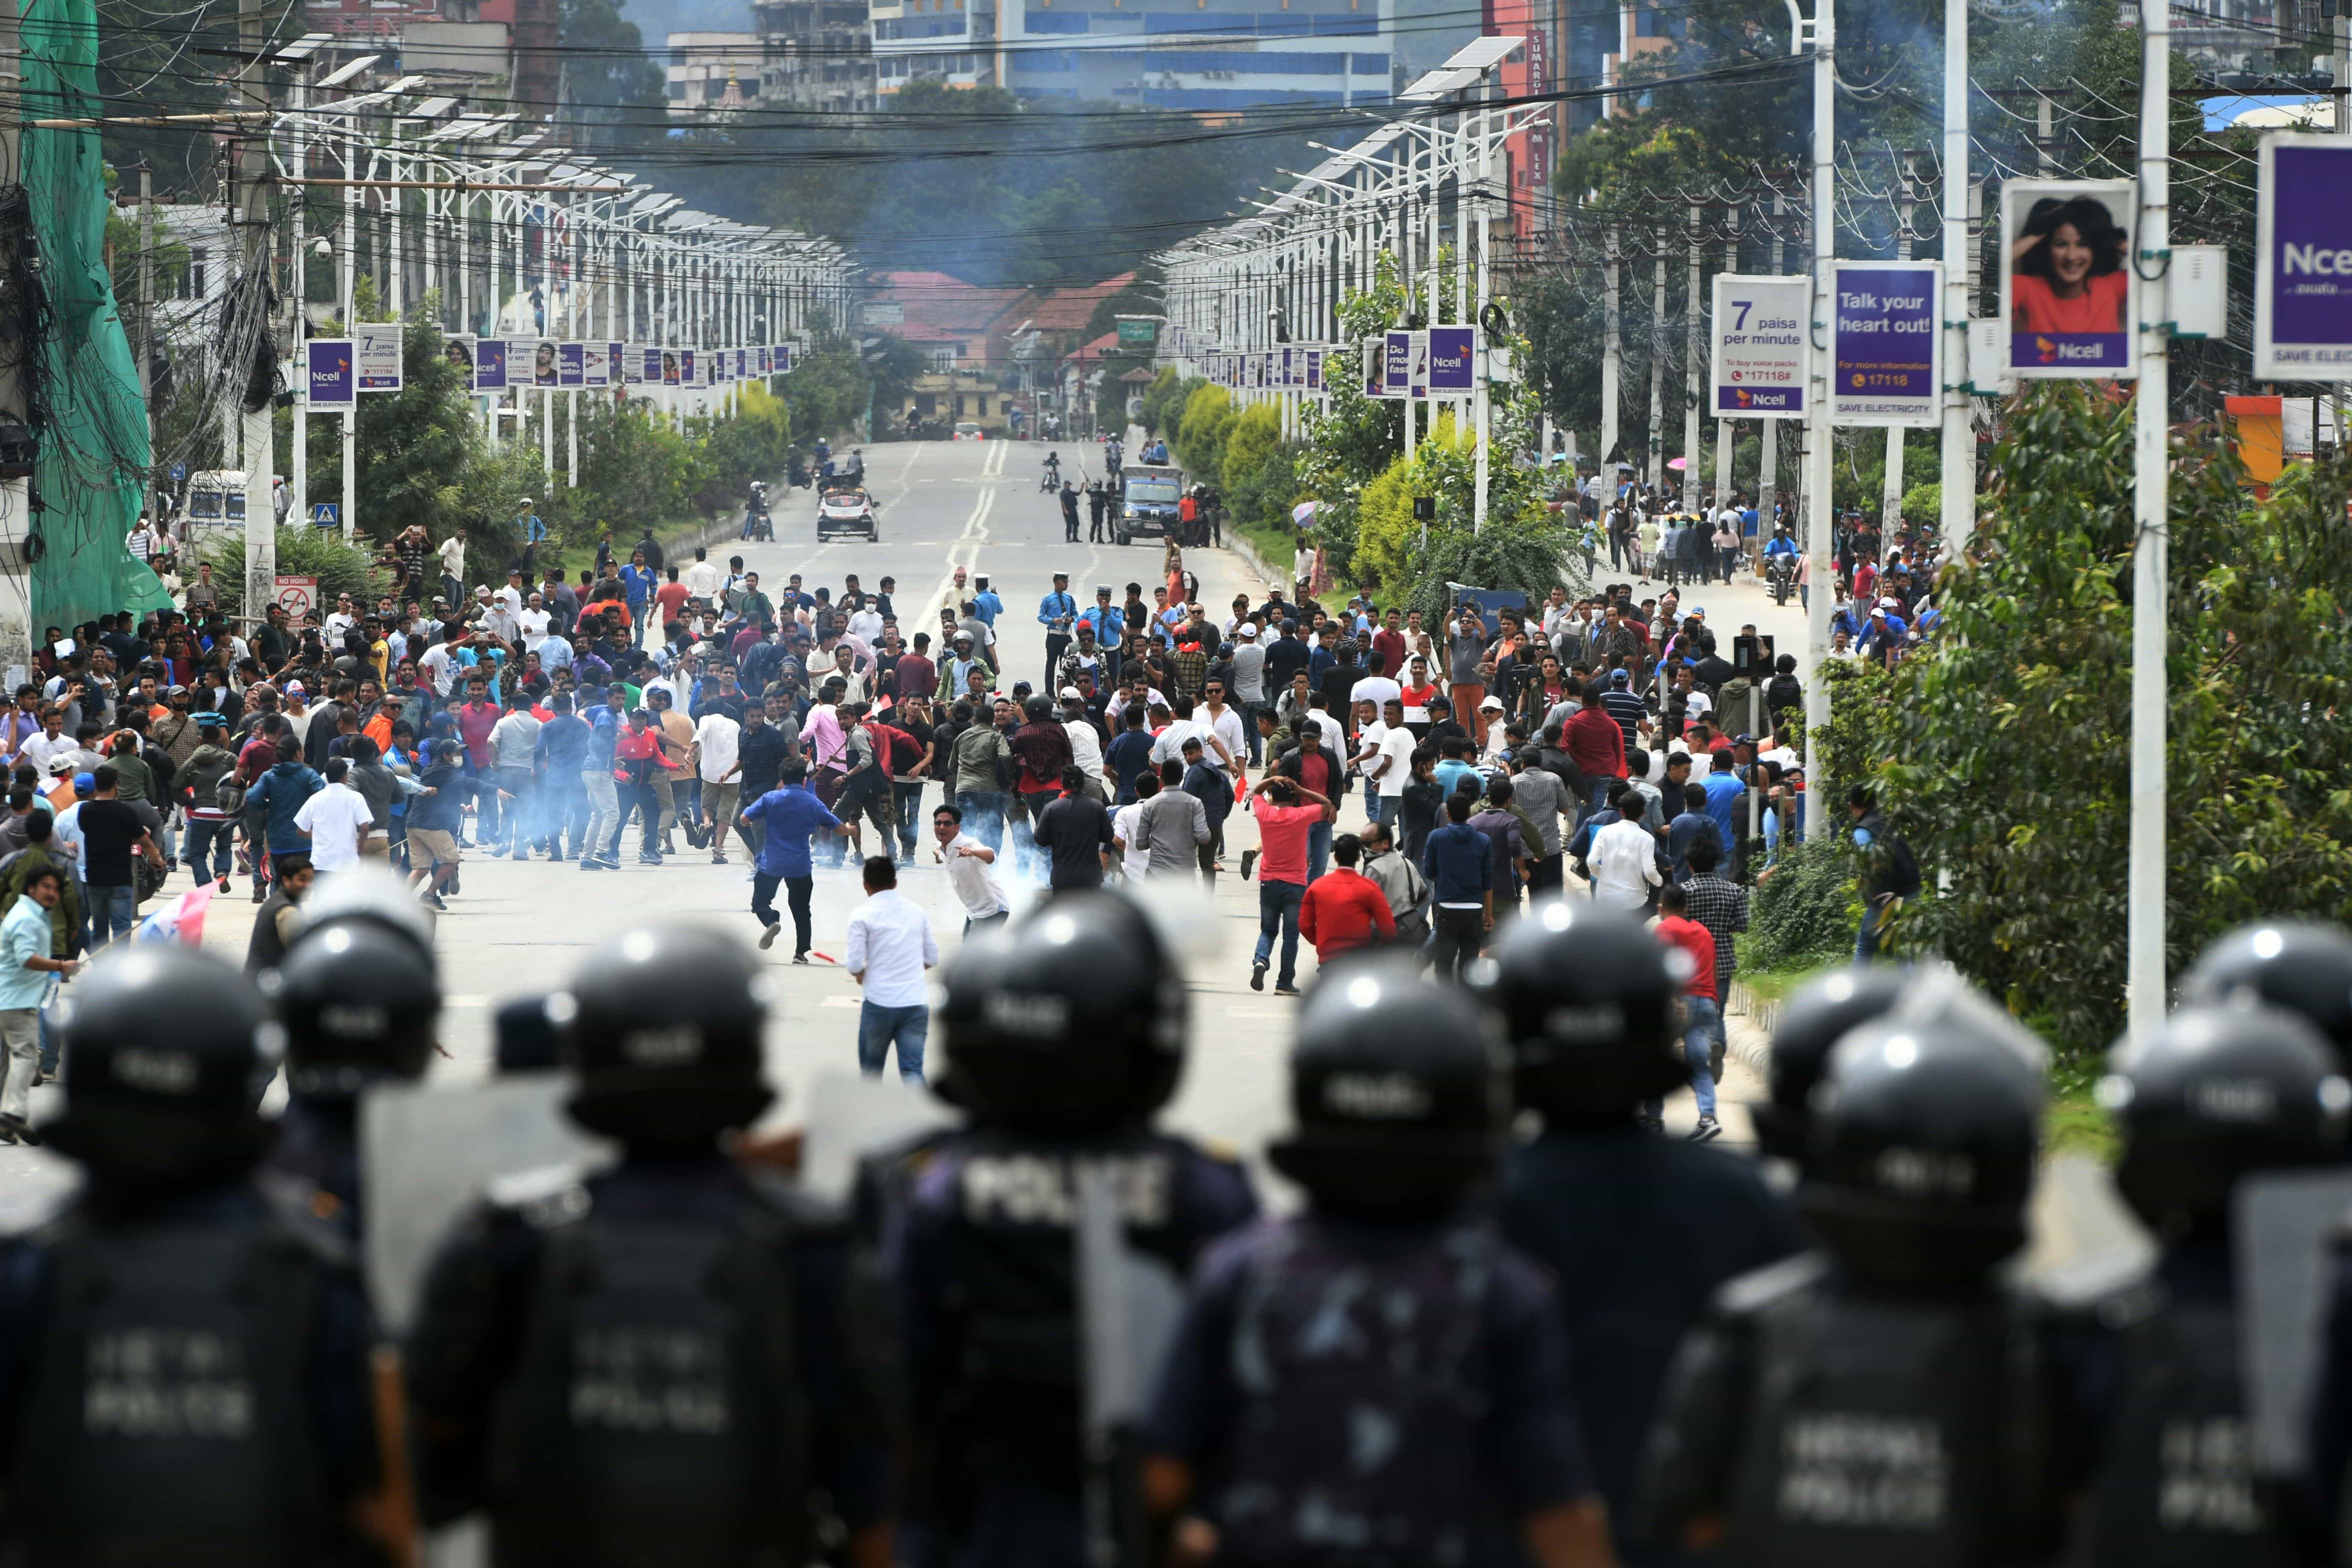 Nepali police use tear gas to disperse crowds of the Tarun Dal, the youth wing of Nepali Congress Party, during a demonstration against the government, Kathmandu, Nepal, 21 July 2018, PRAKASH MATHEMA/AFP/Getty Images